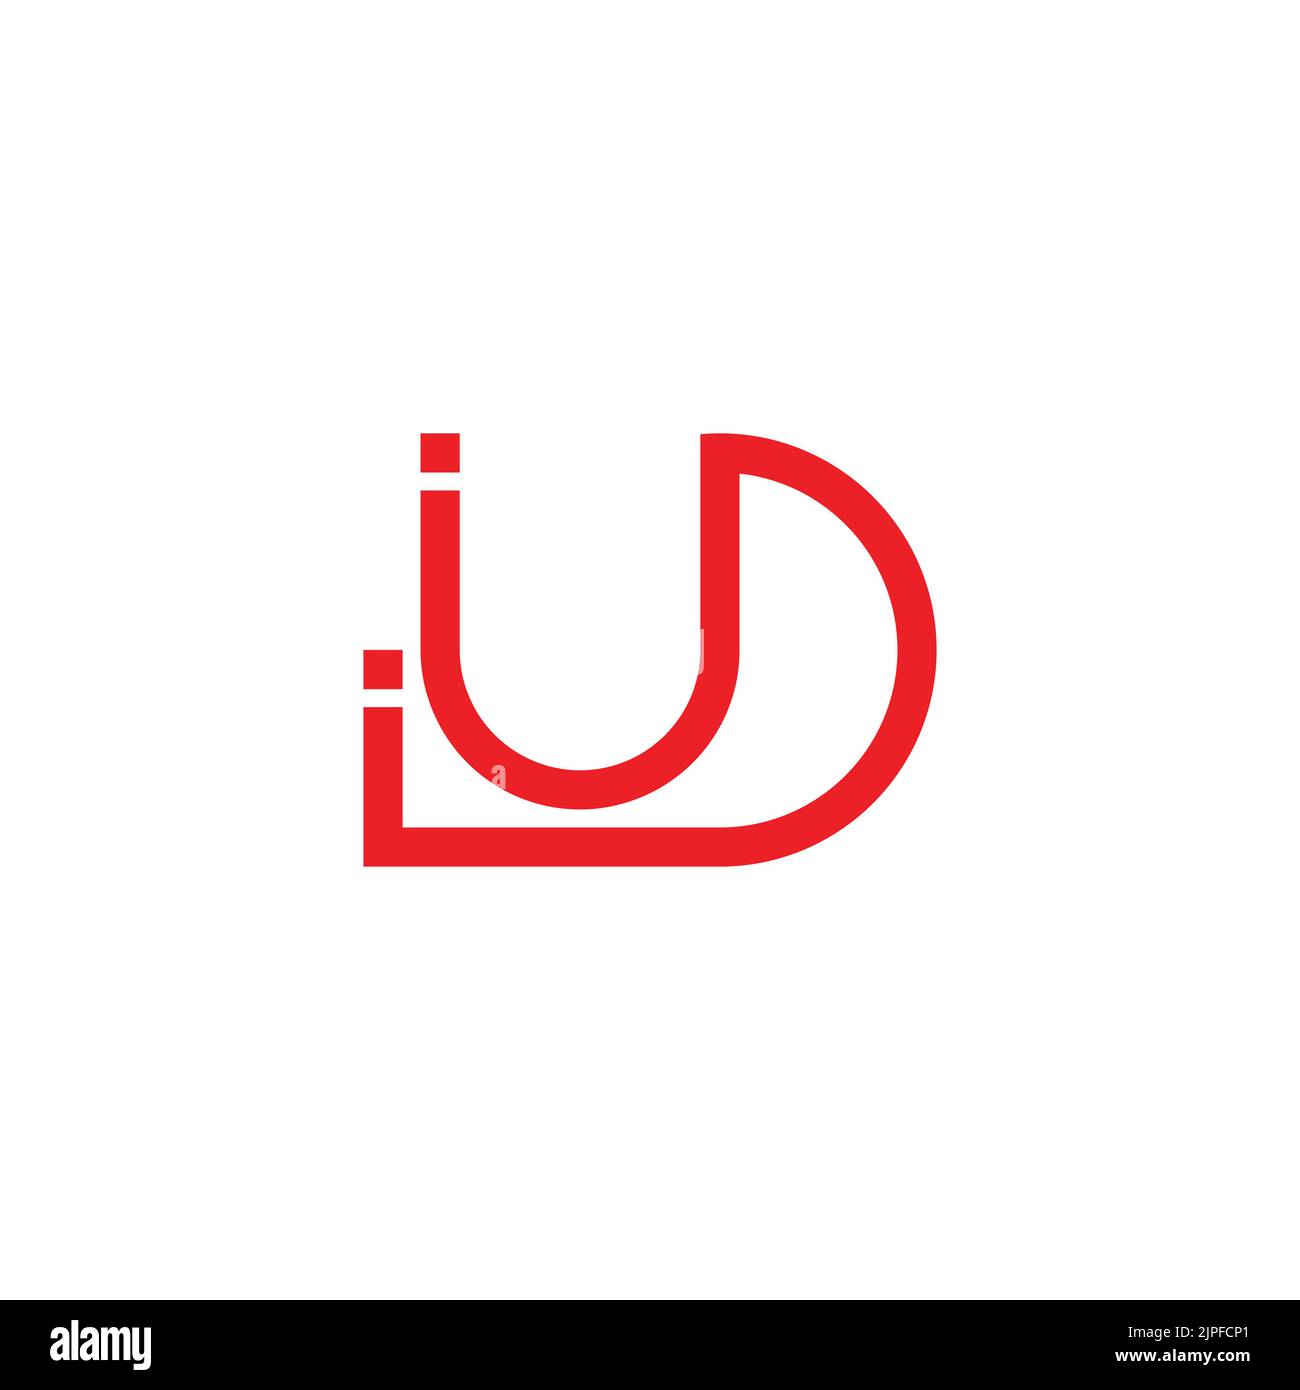 letter ud dots thin line logo vector Stock Vector